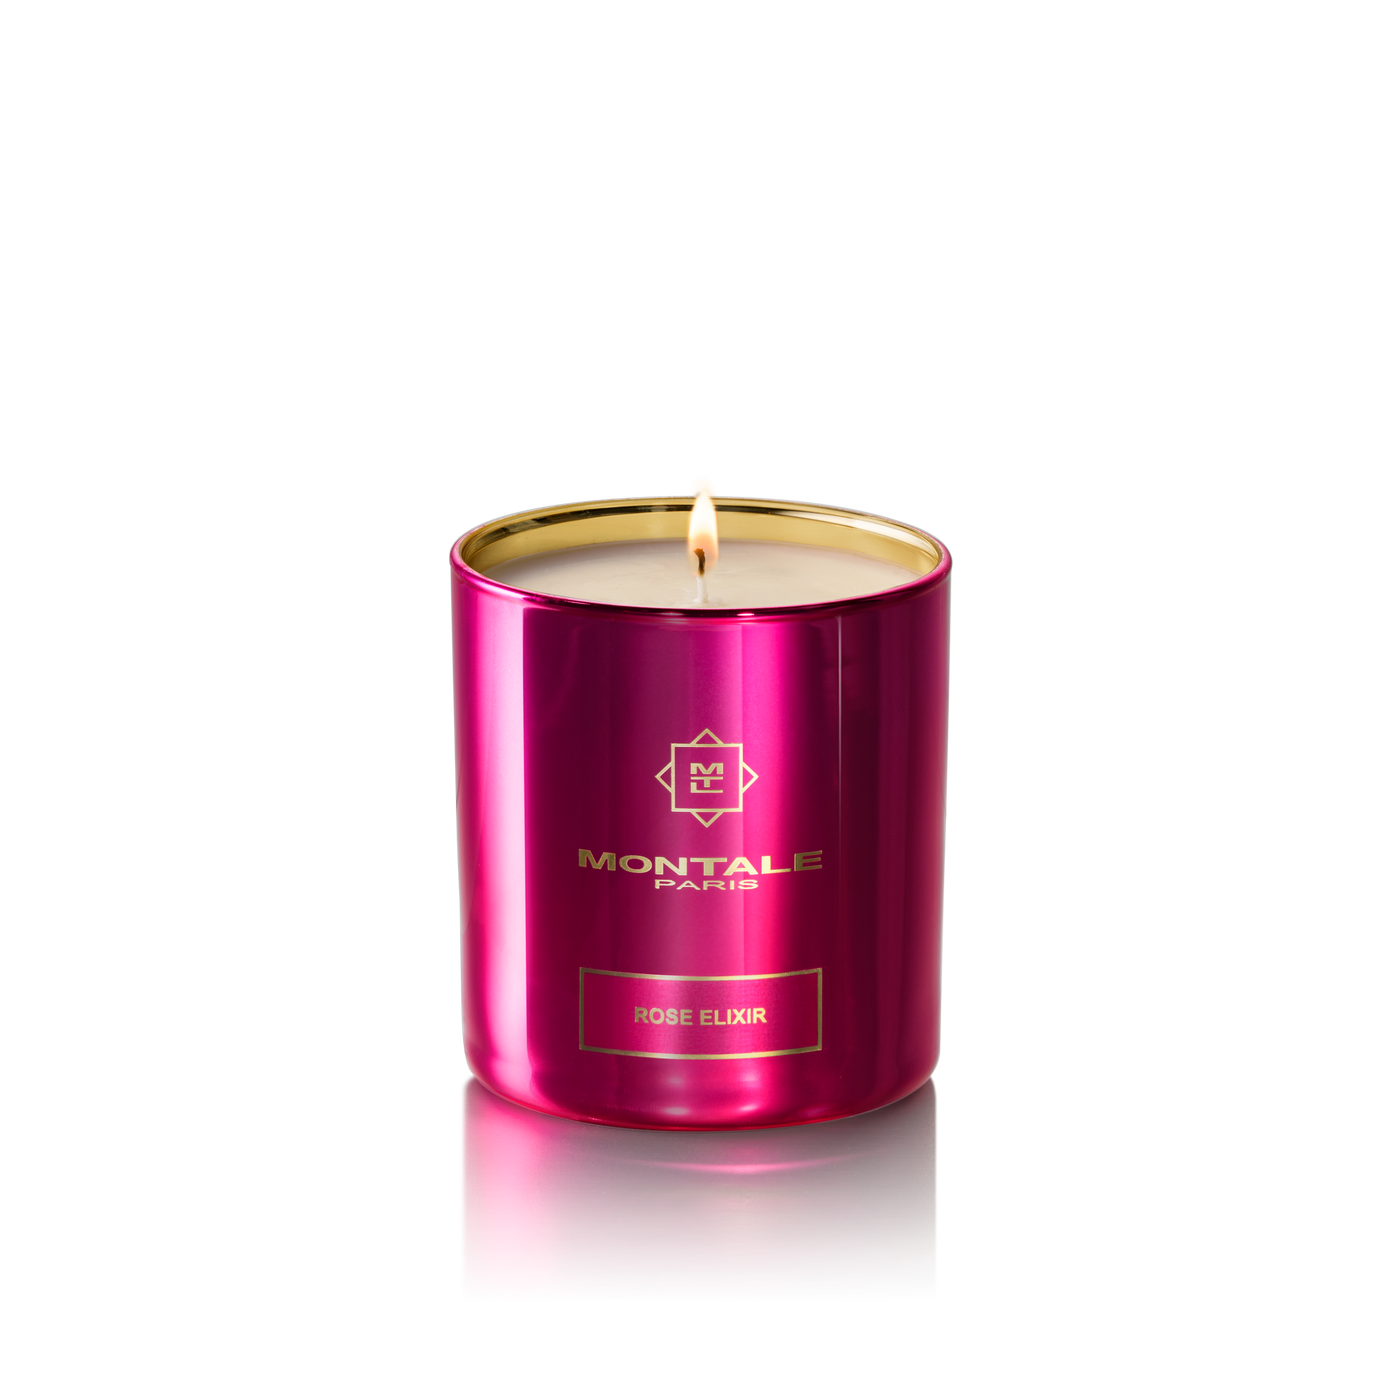 Rose Elixir - Scented Candle